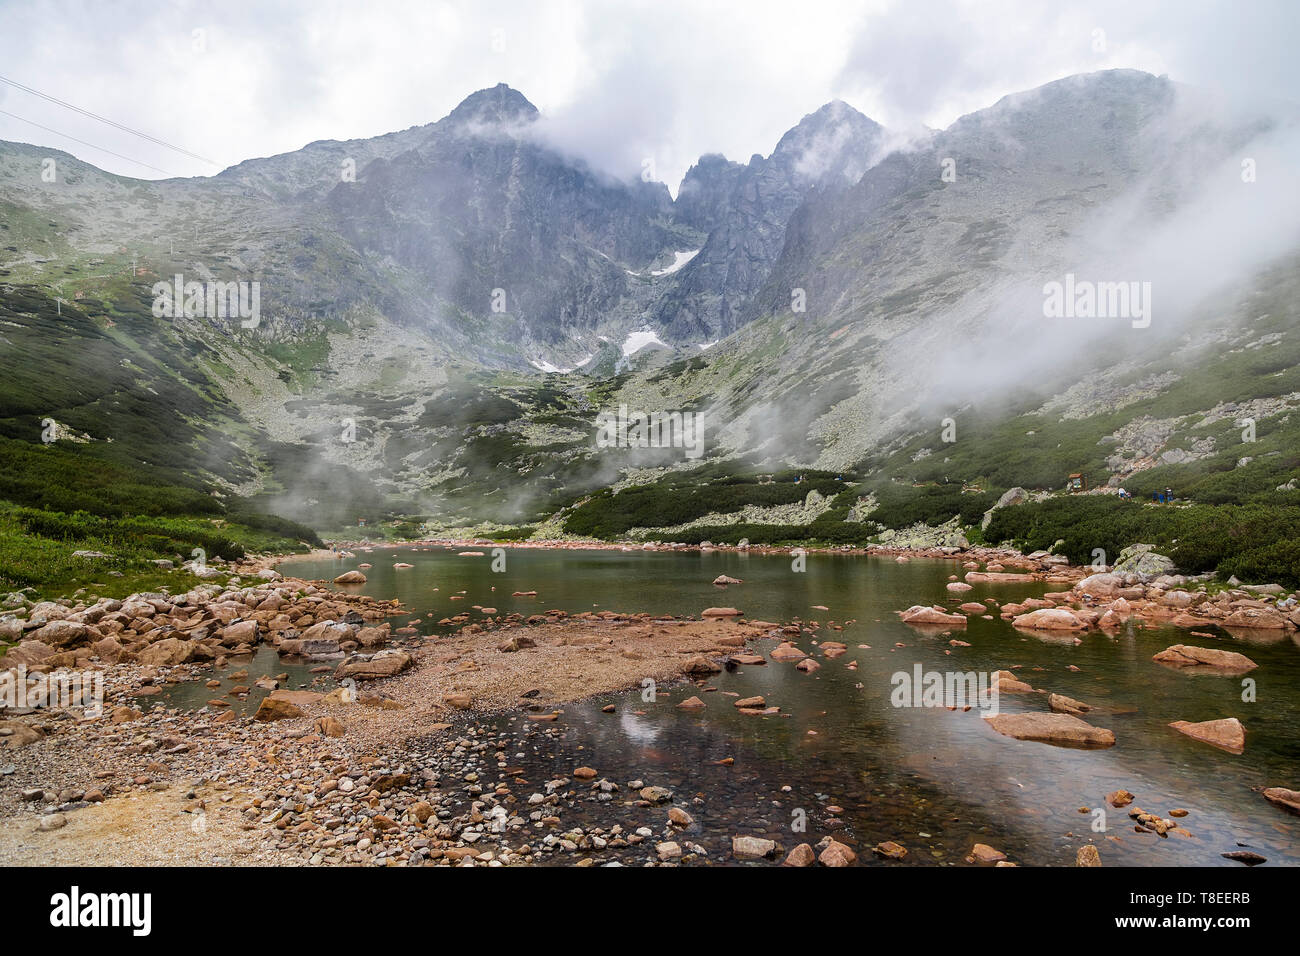 Mount Lomnicky Peak in the High Tatras and lake in the mountains. Slovakia Stock Photo